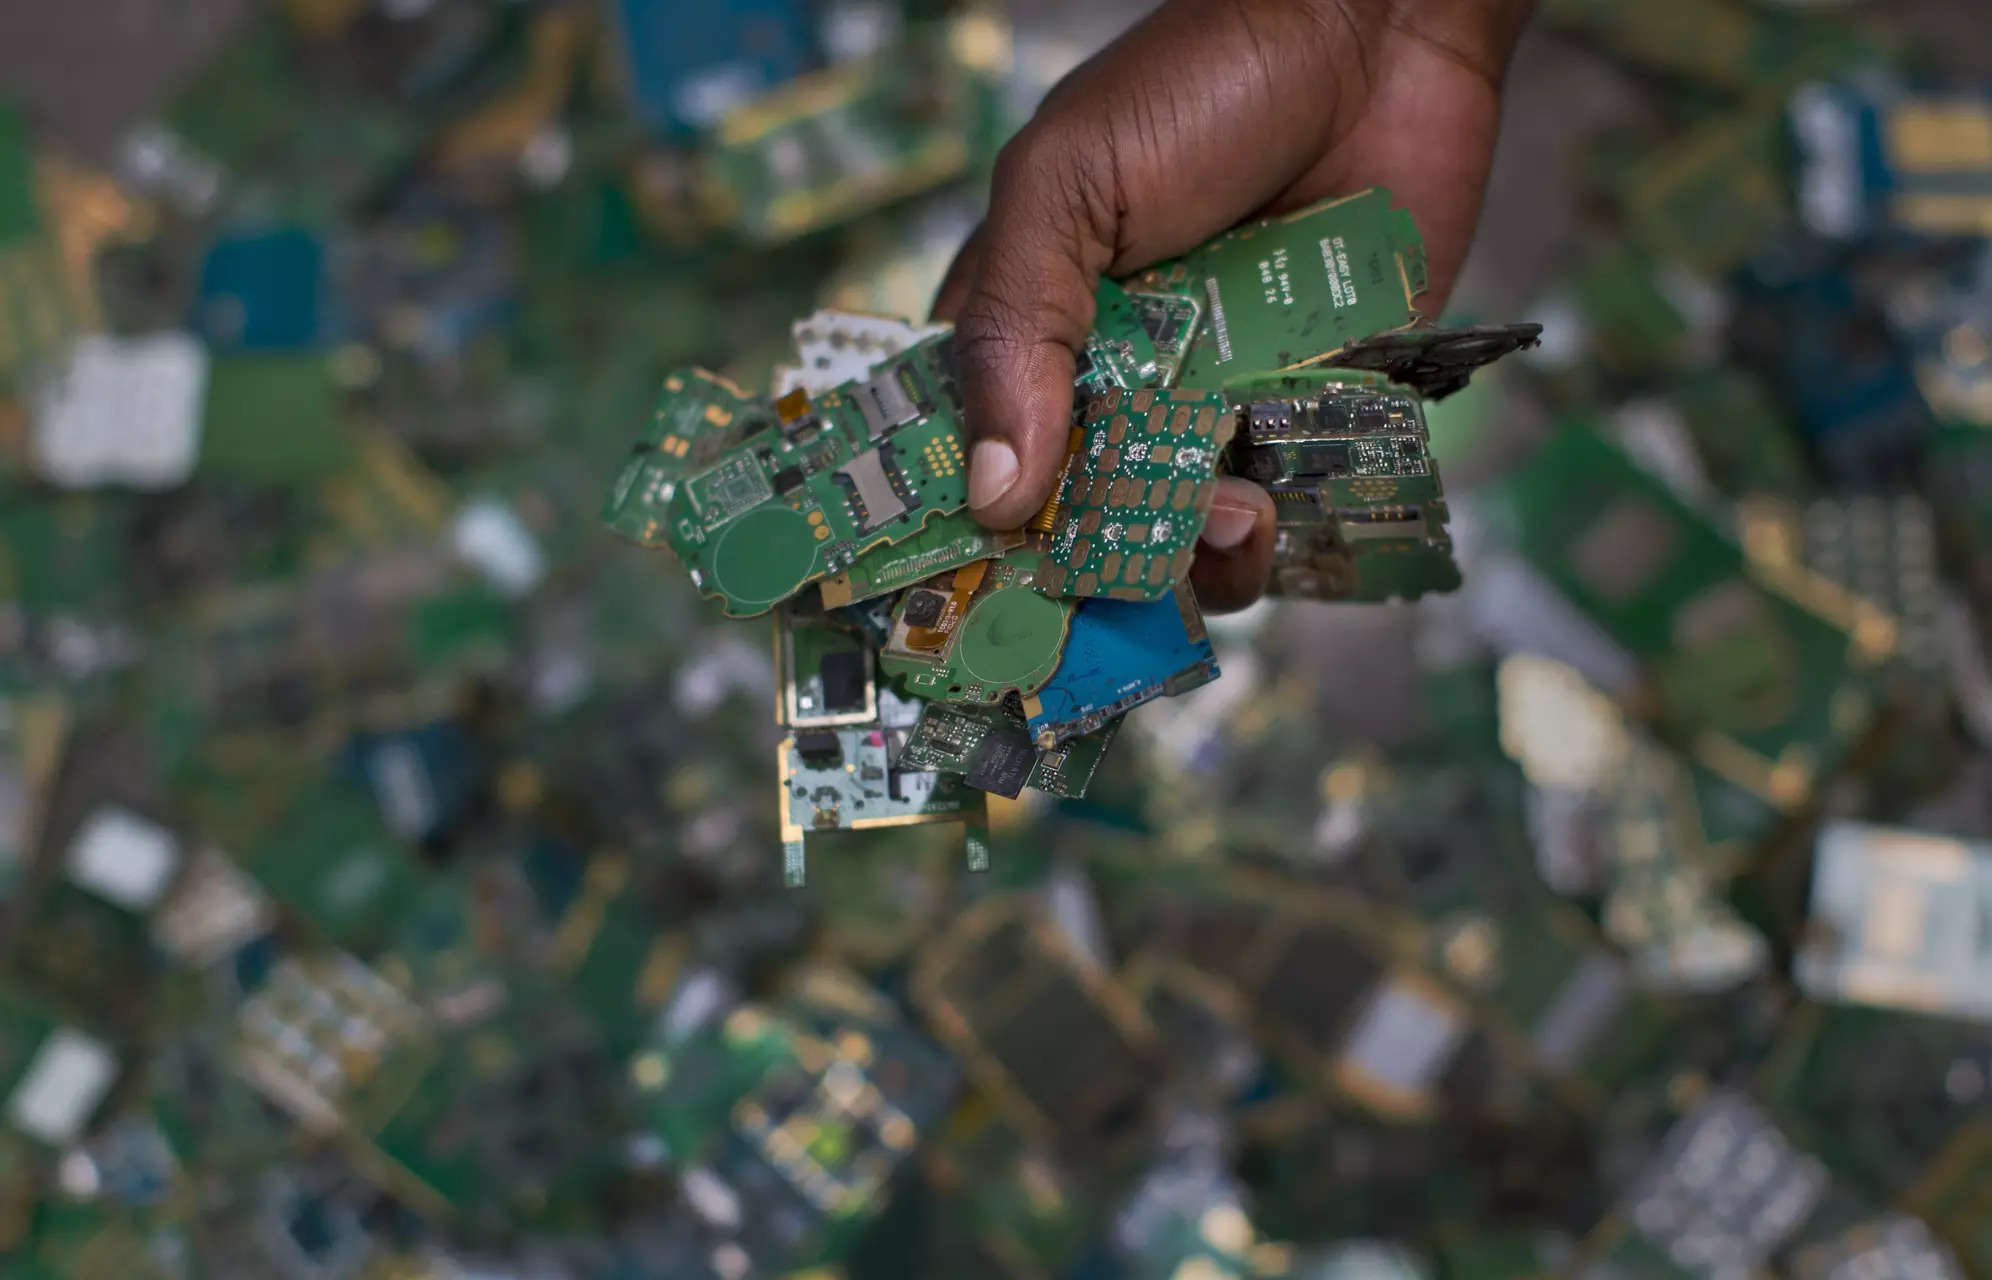 <p>For some, e-waste represents a way to earn cash by rummaging through trash in the developing world to find coveted commodities, despite the health risks.<br /></p>